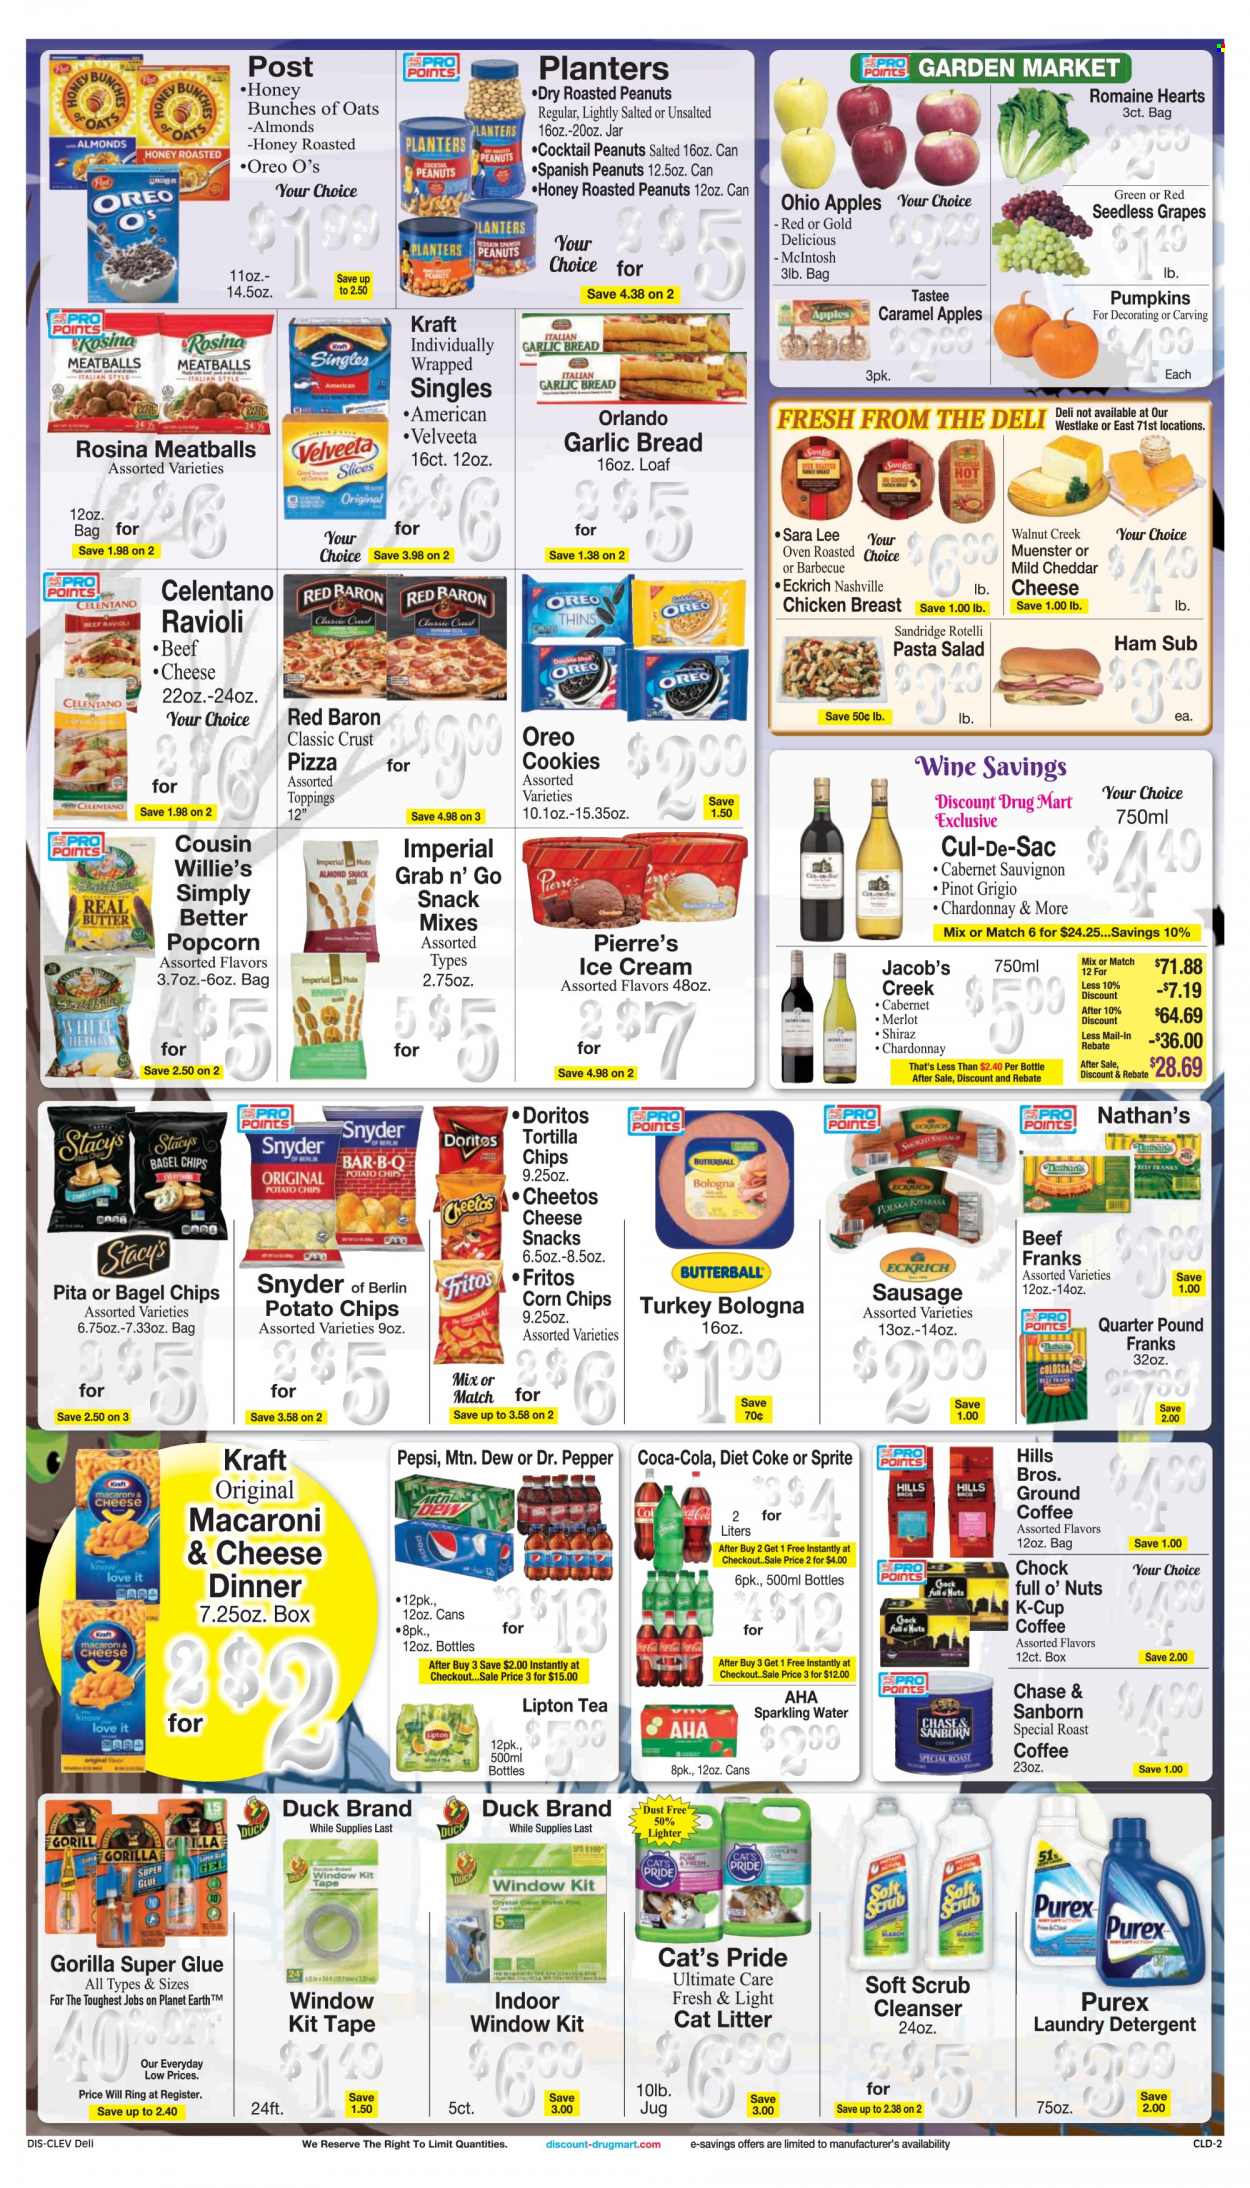 thumbnail - Discount Drug Mart Flyer - 10/20/2021 - 10/26/2021 - Sales products - seedless grapes, bagels, bread, Sara Lee, pumpkin, salad, apples, grapes, macaroni & cheese, ravioli, pizza, meatballs, pasta, Kraft®, Butterball, ham, bologna sausage, sausage, pasta salad, sandwich slices, Münster cheese, Kraft Singles, Oreo, ice cream, Red Baron, cookies, snack, Doritos, Fritos, tortilla chips, potato chips, Cheetos, chips, Thins, corn chips, popcorn, caramel, roasted peanuts, peanuts, Planters, Coca-Cola, Mountain Dew, Sprite, Pepsi, Lipton, Dr. Pepper, Diet Coke, sparkling water, tea, coffee, ground coffee, coffee capsules, K-Cups, Cabernet Sauvignon, red wine, white wine, Chardonnay, wine, Merlot, Jacob's Creek, Shiraz, Pinot Grigio, chicken breasts, detergent, laundry detergent, Rin, Purex, cleanser, glue, cat litter, Hill's, McIntosh. Page 2.